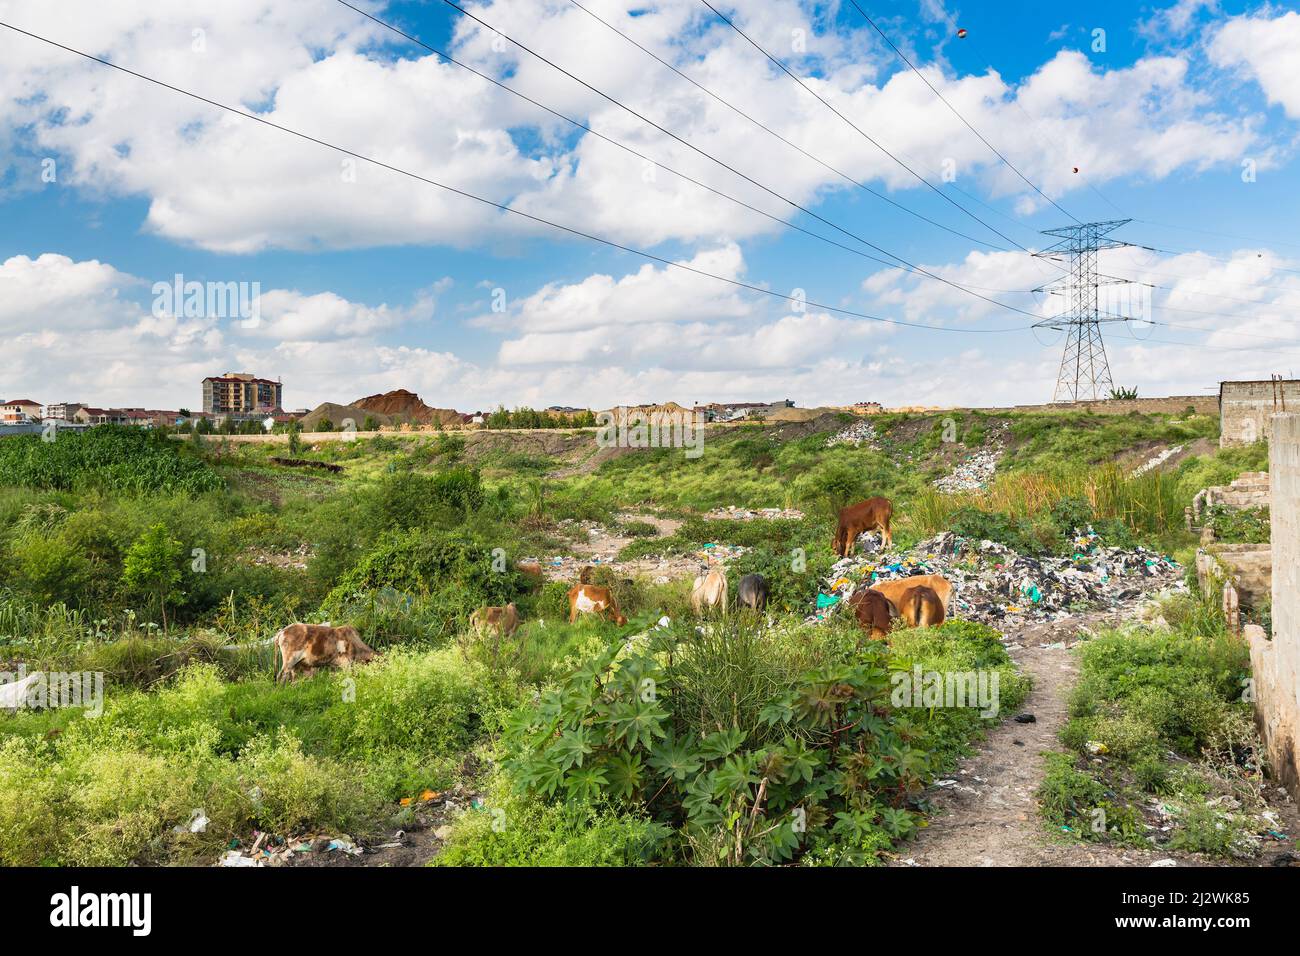 Garbage thrown into the Ngong River valley in Tassia, Nairobi, Kenya, some cows grazing on the meadows. Stock Photo